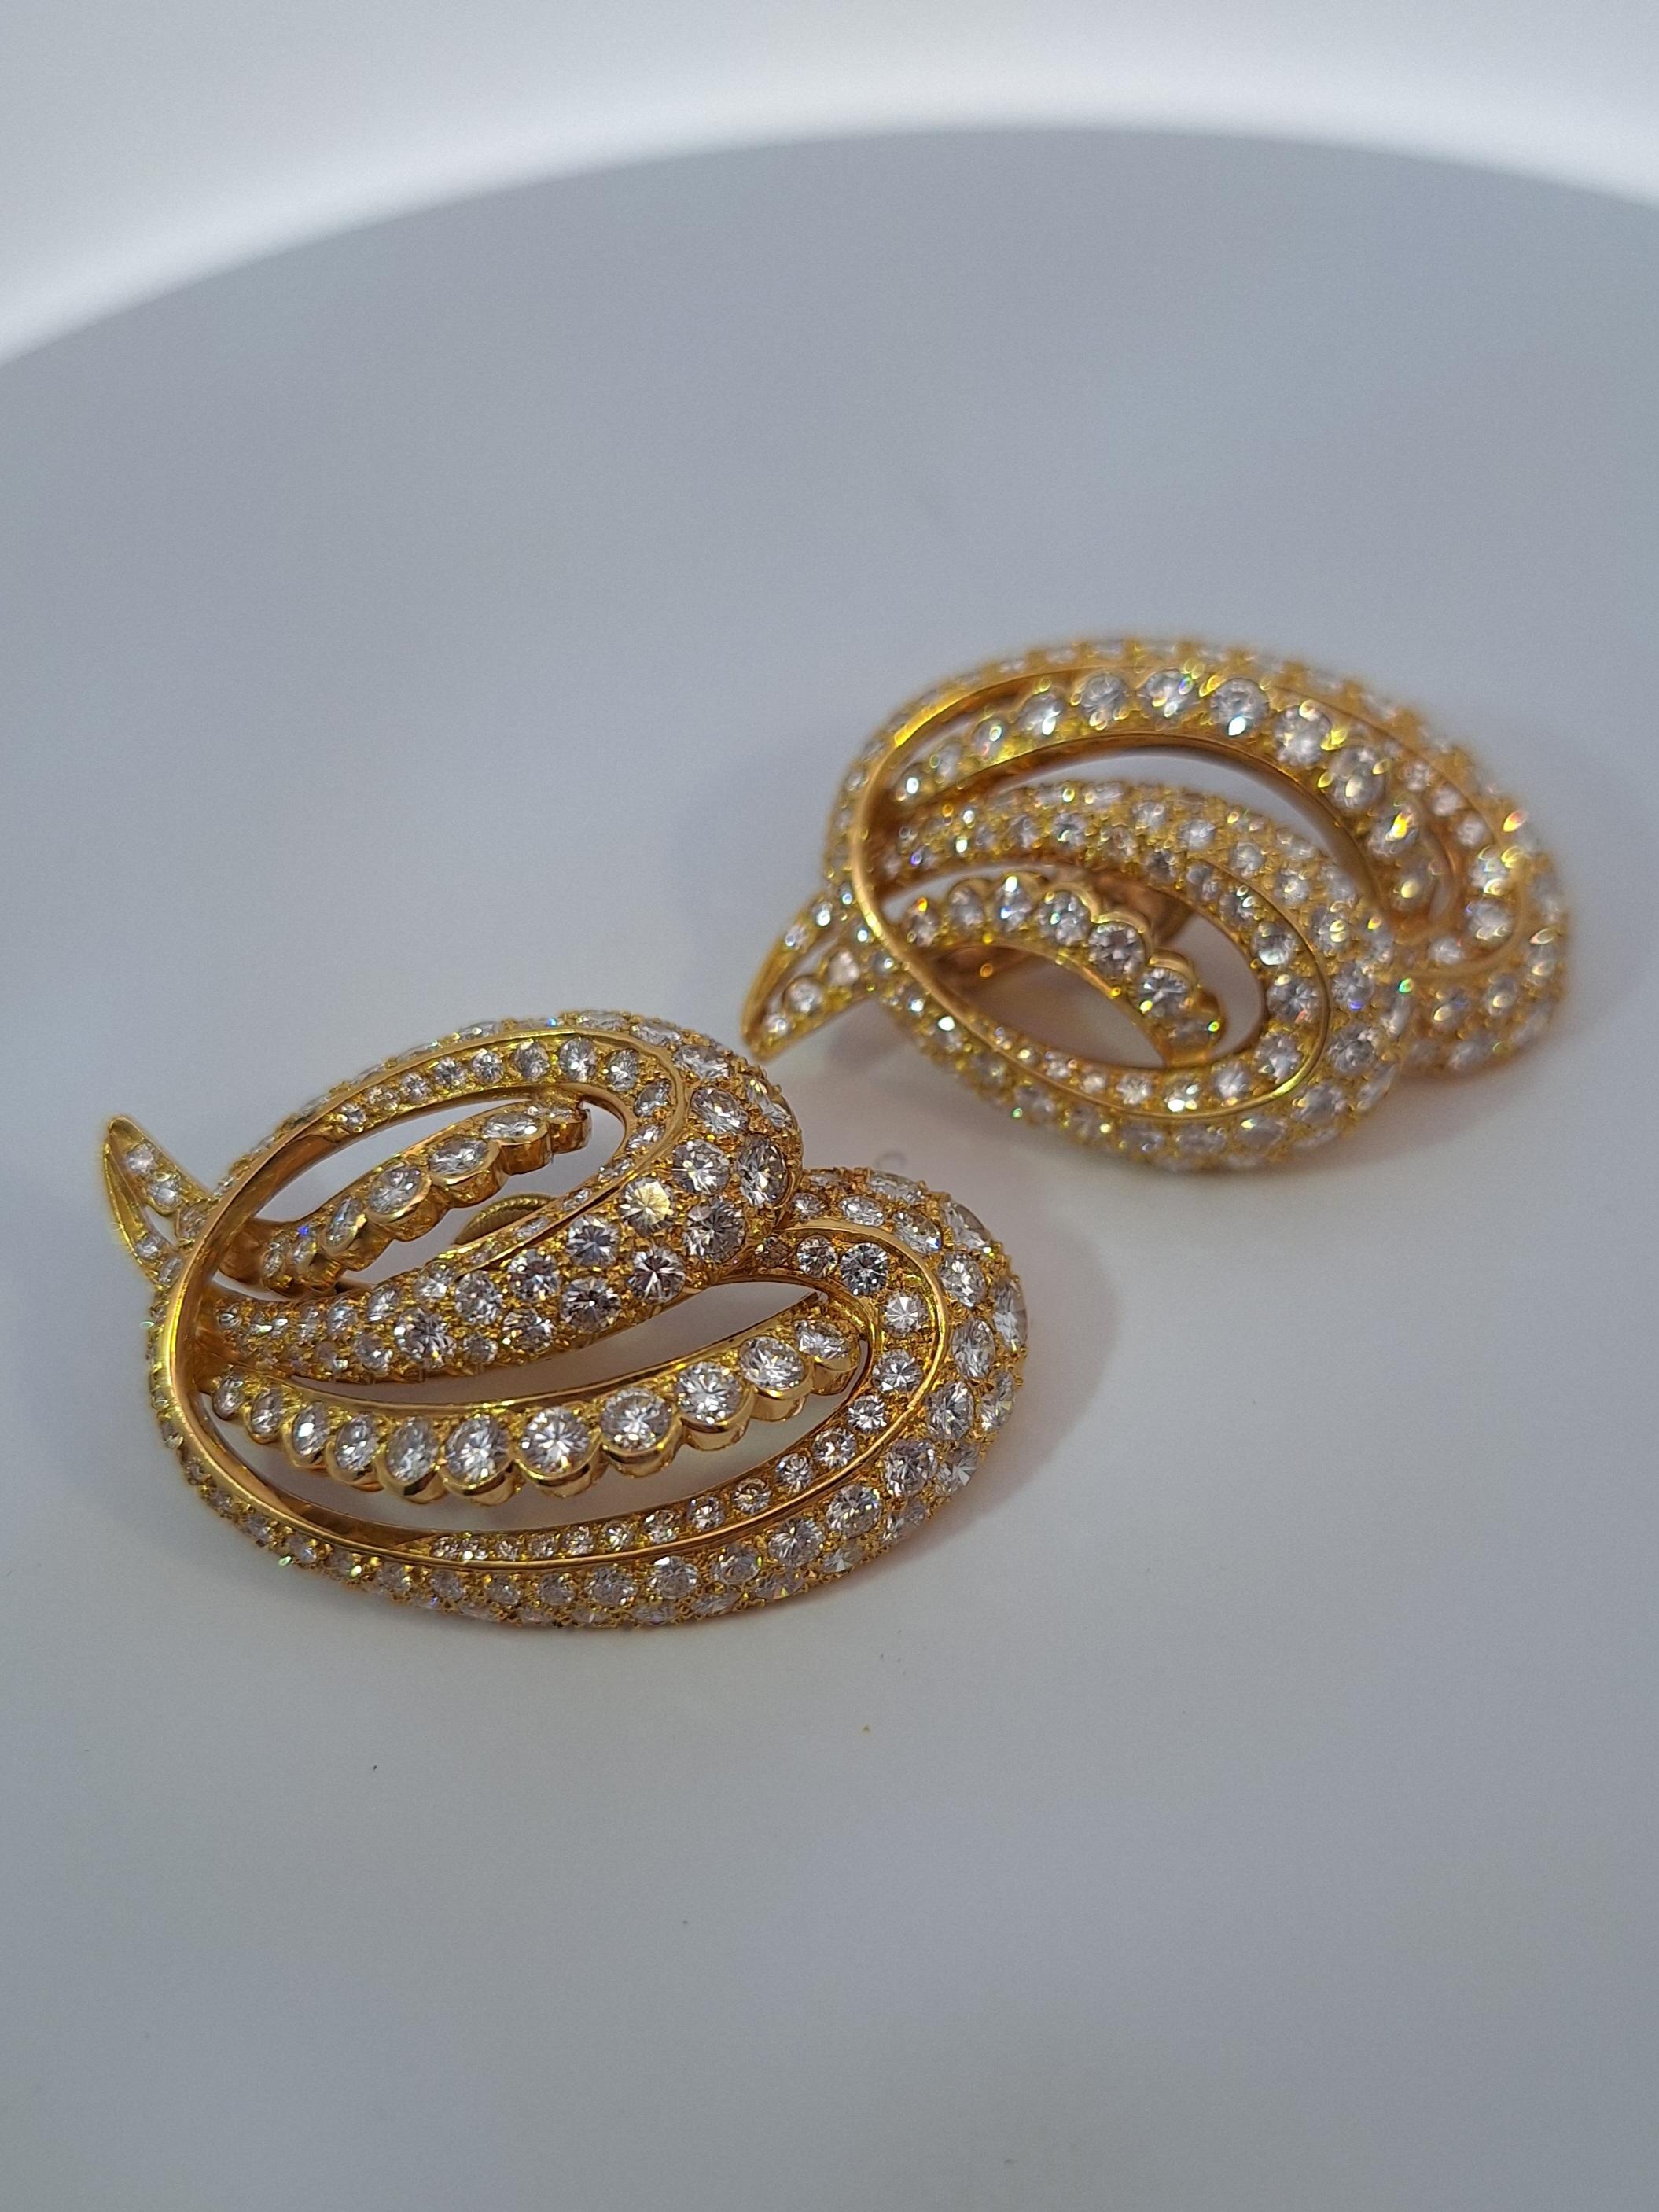 Cartier Gold & Diamond Clip Earrings In Excellent Condition For Sale In New York, NY